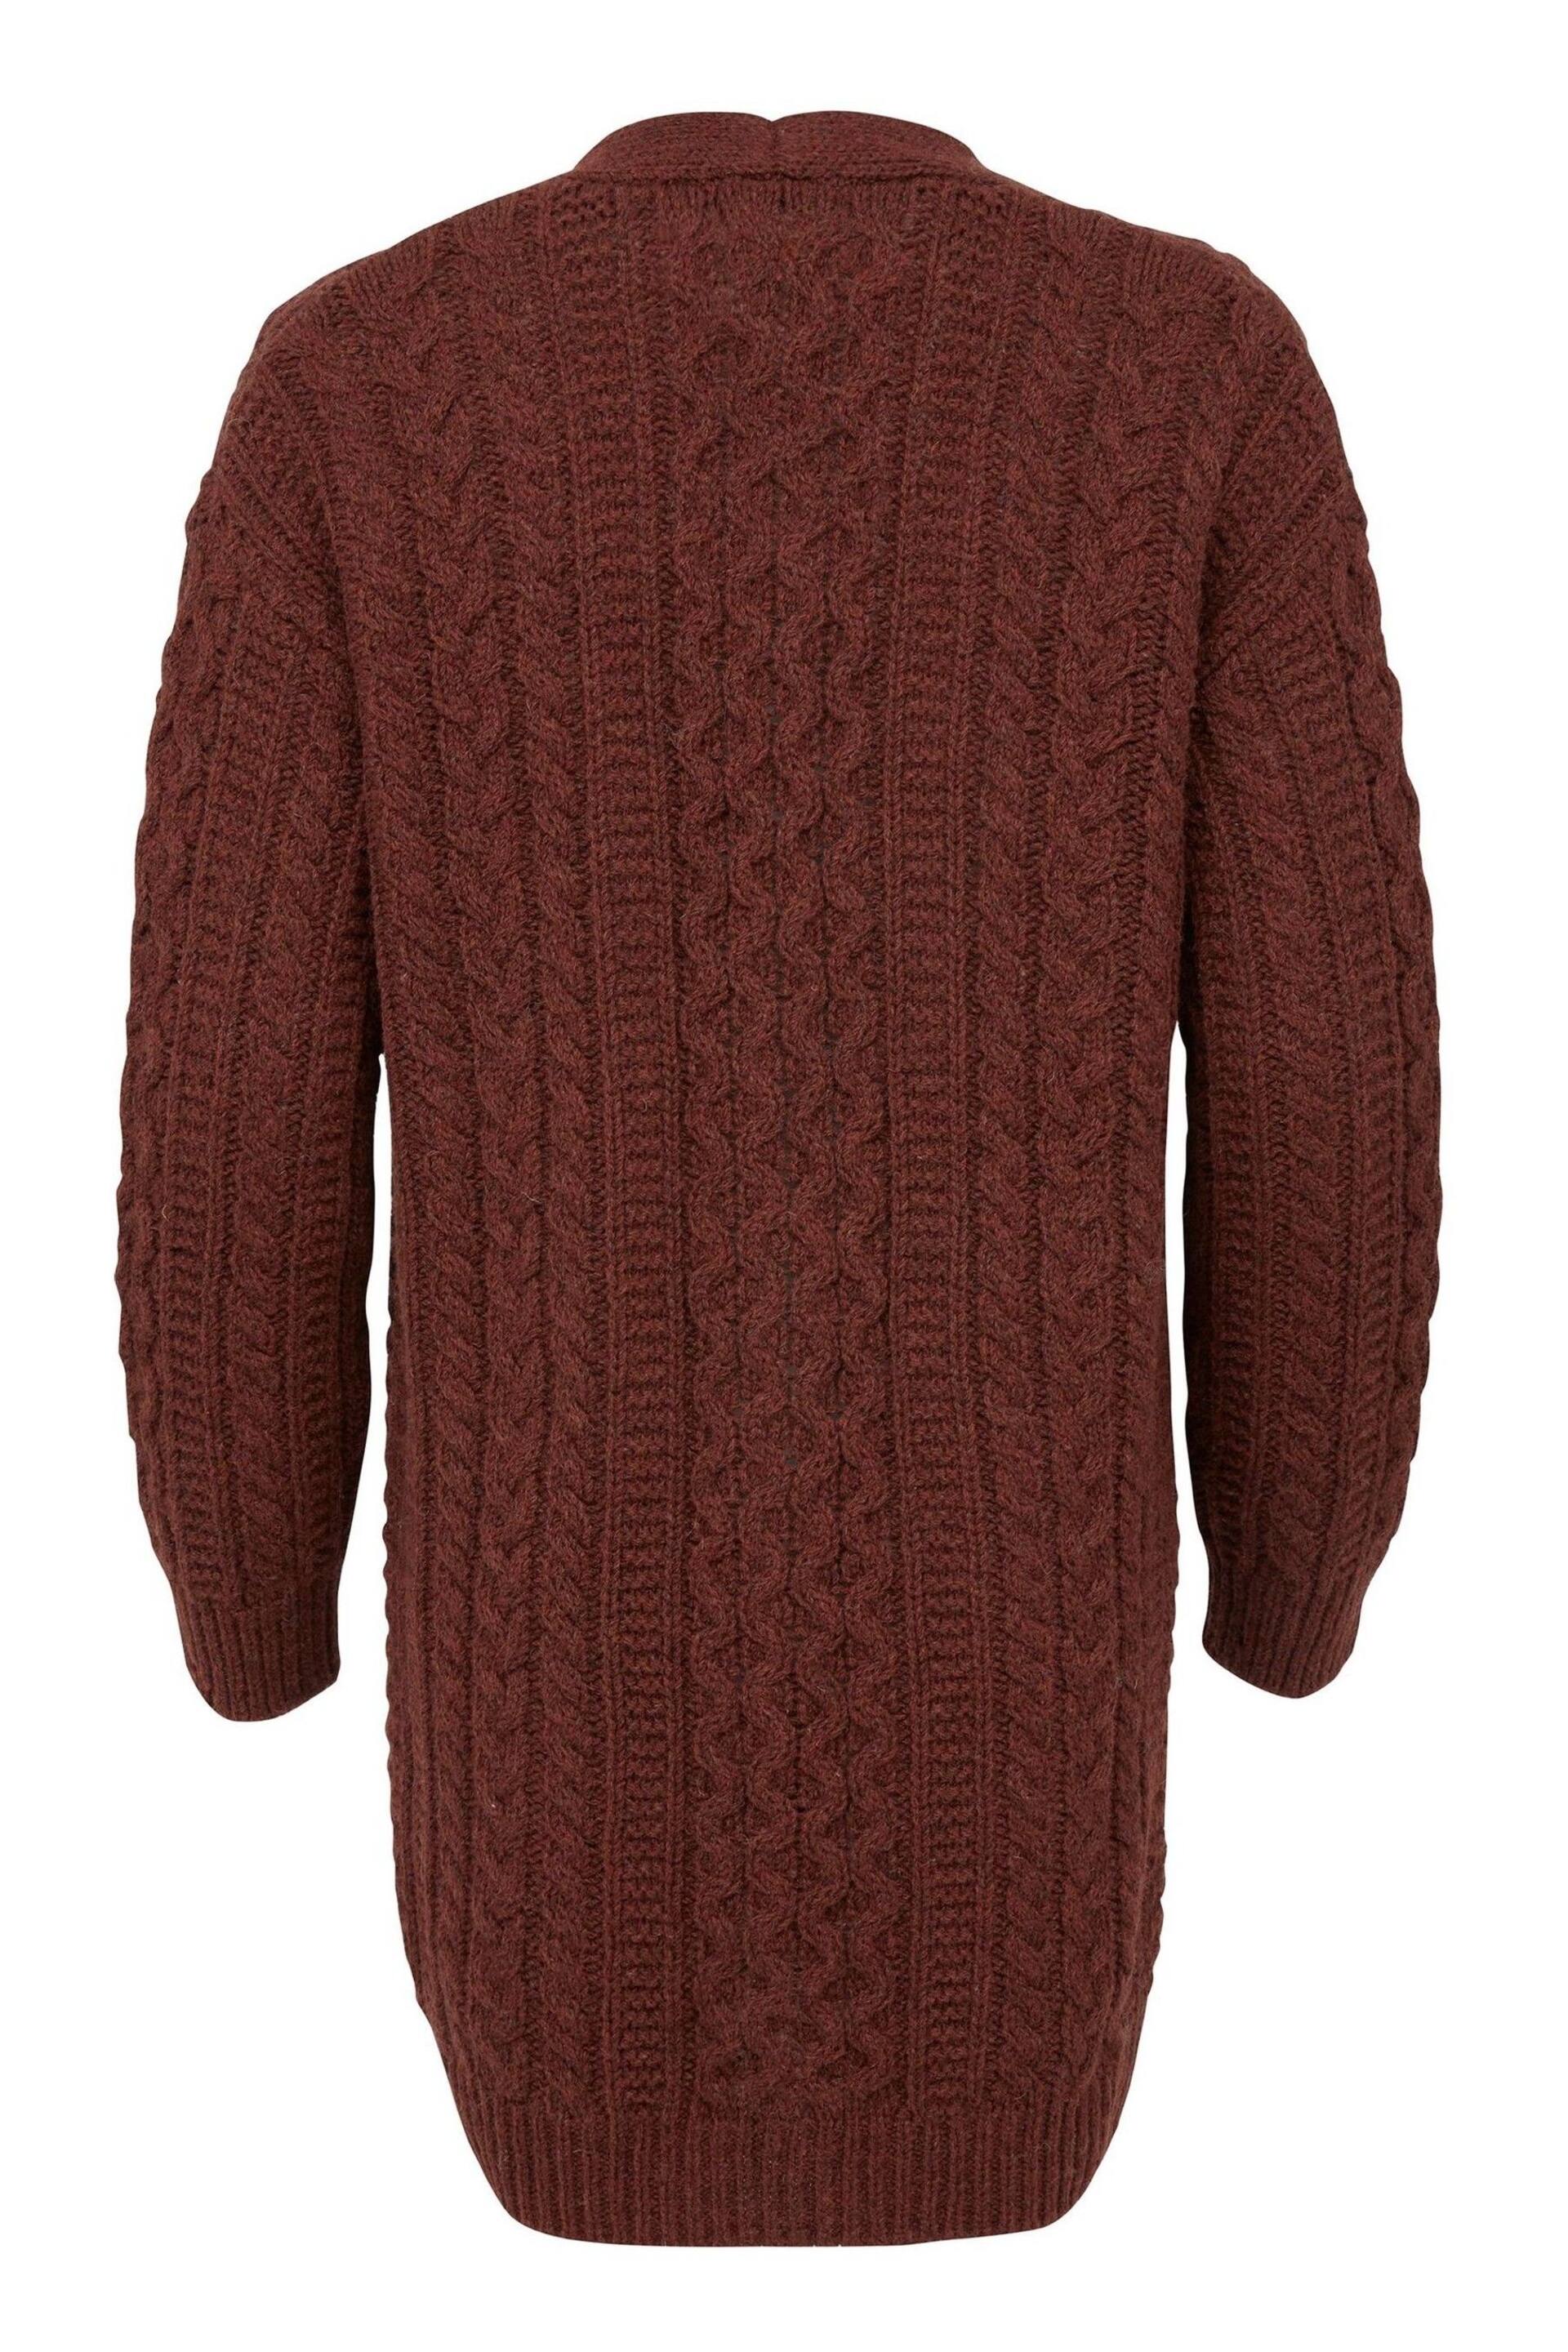 Celtic & Co. Cable Boyfriend Brown Cardigan - Image 3 of 7